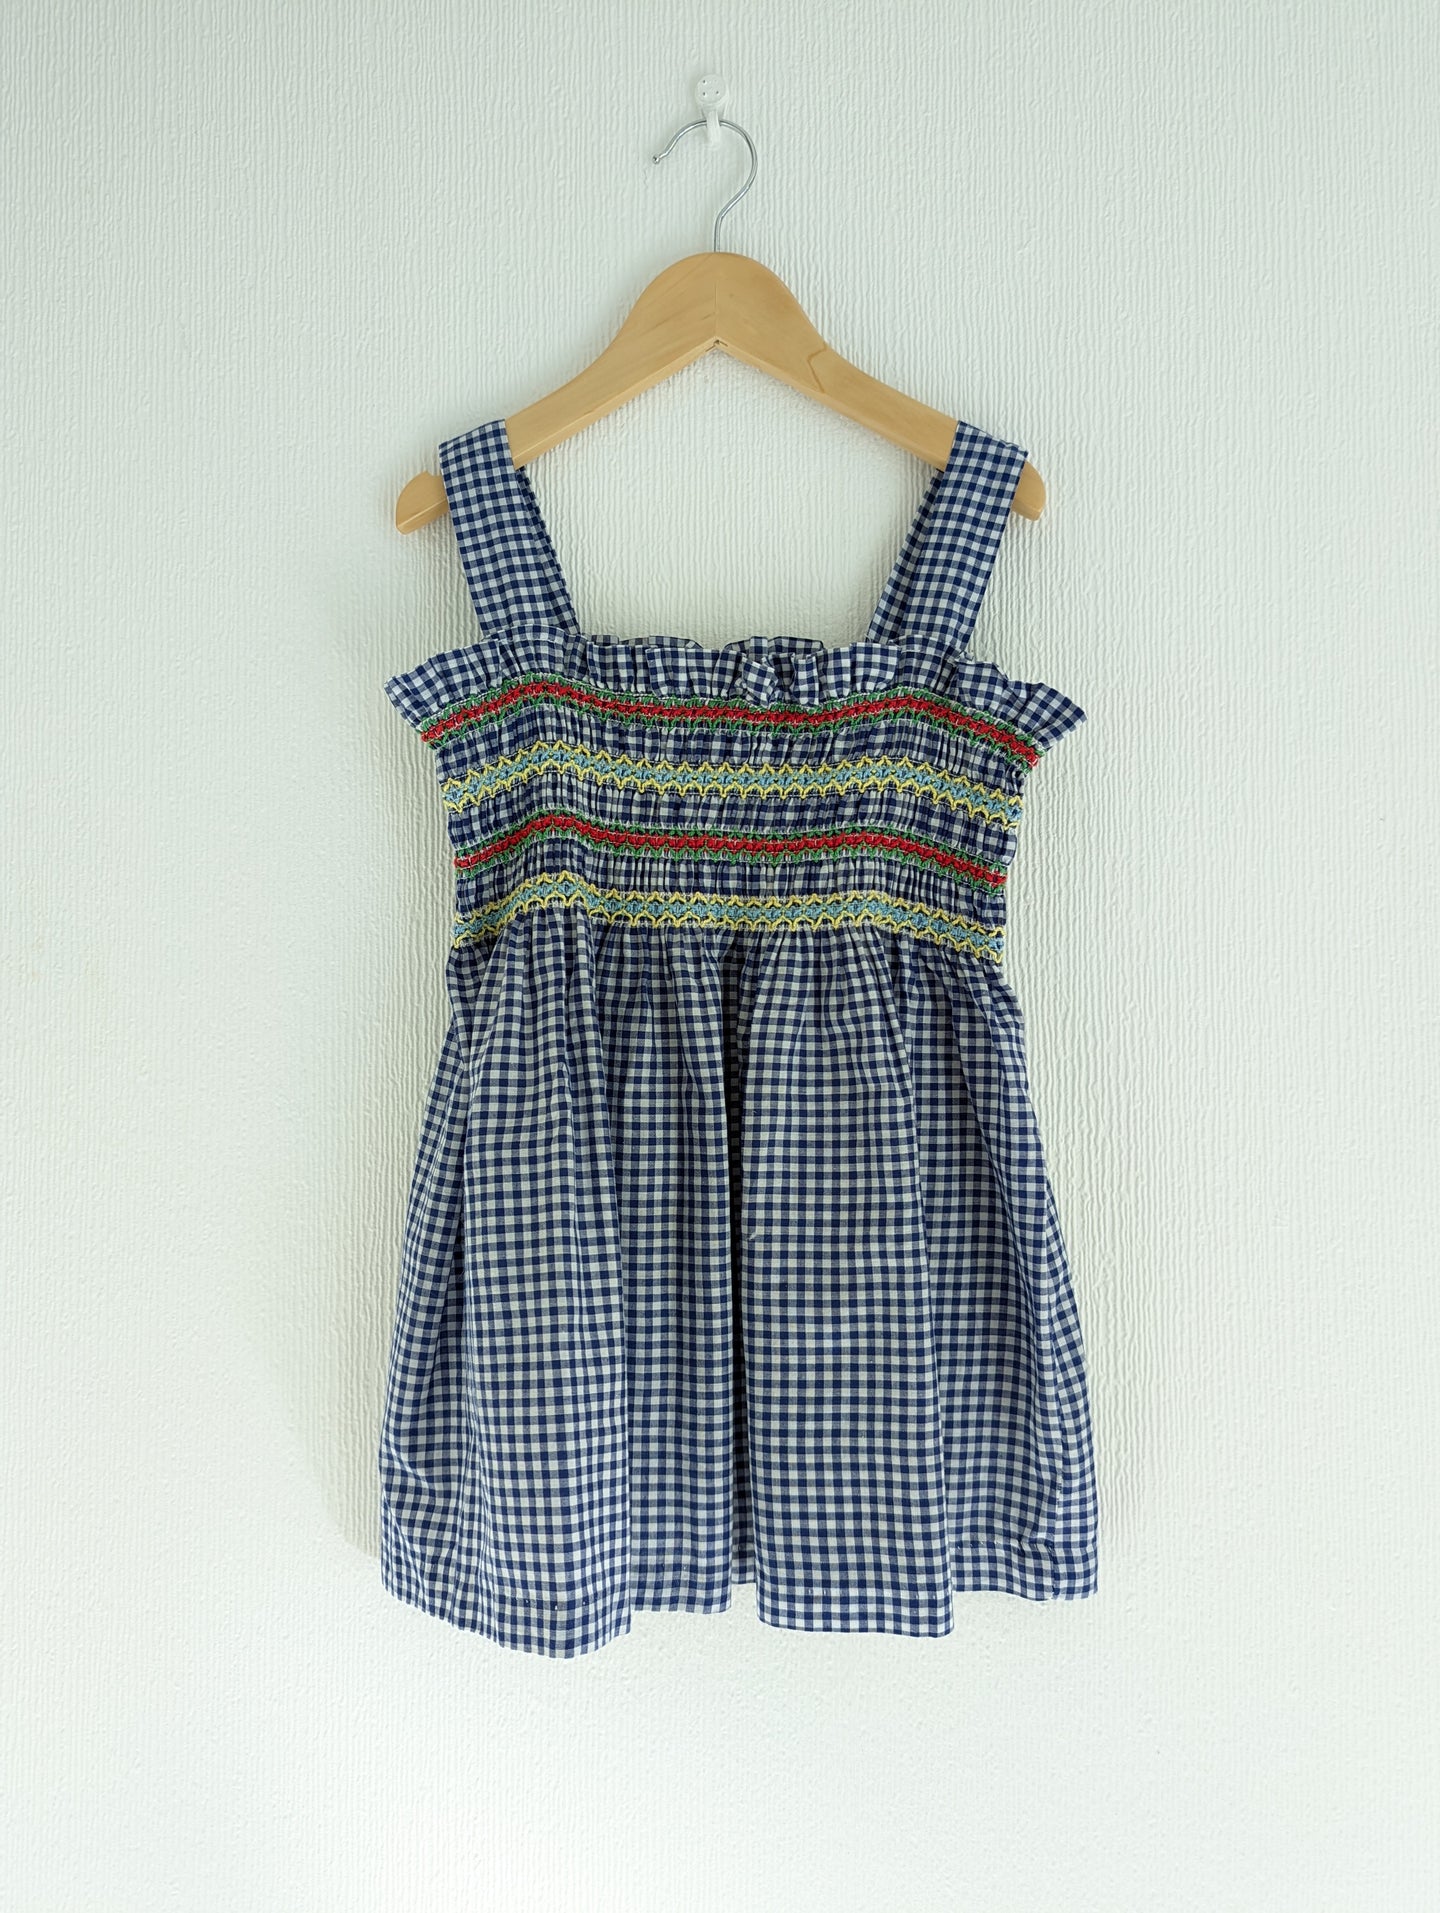 Gorgeous Gingham Smocked Dress / Top - 3-6 Years